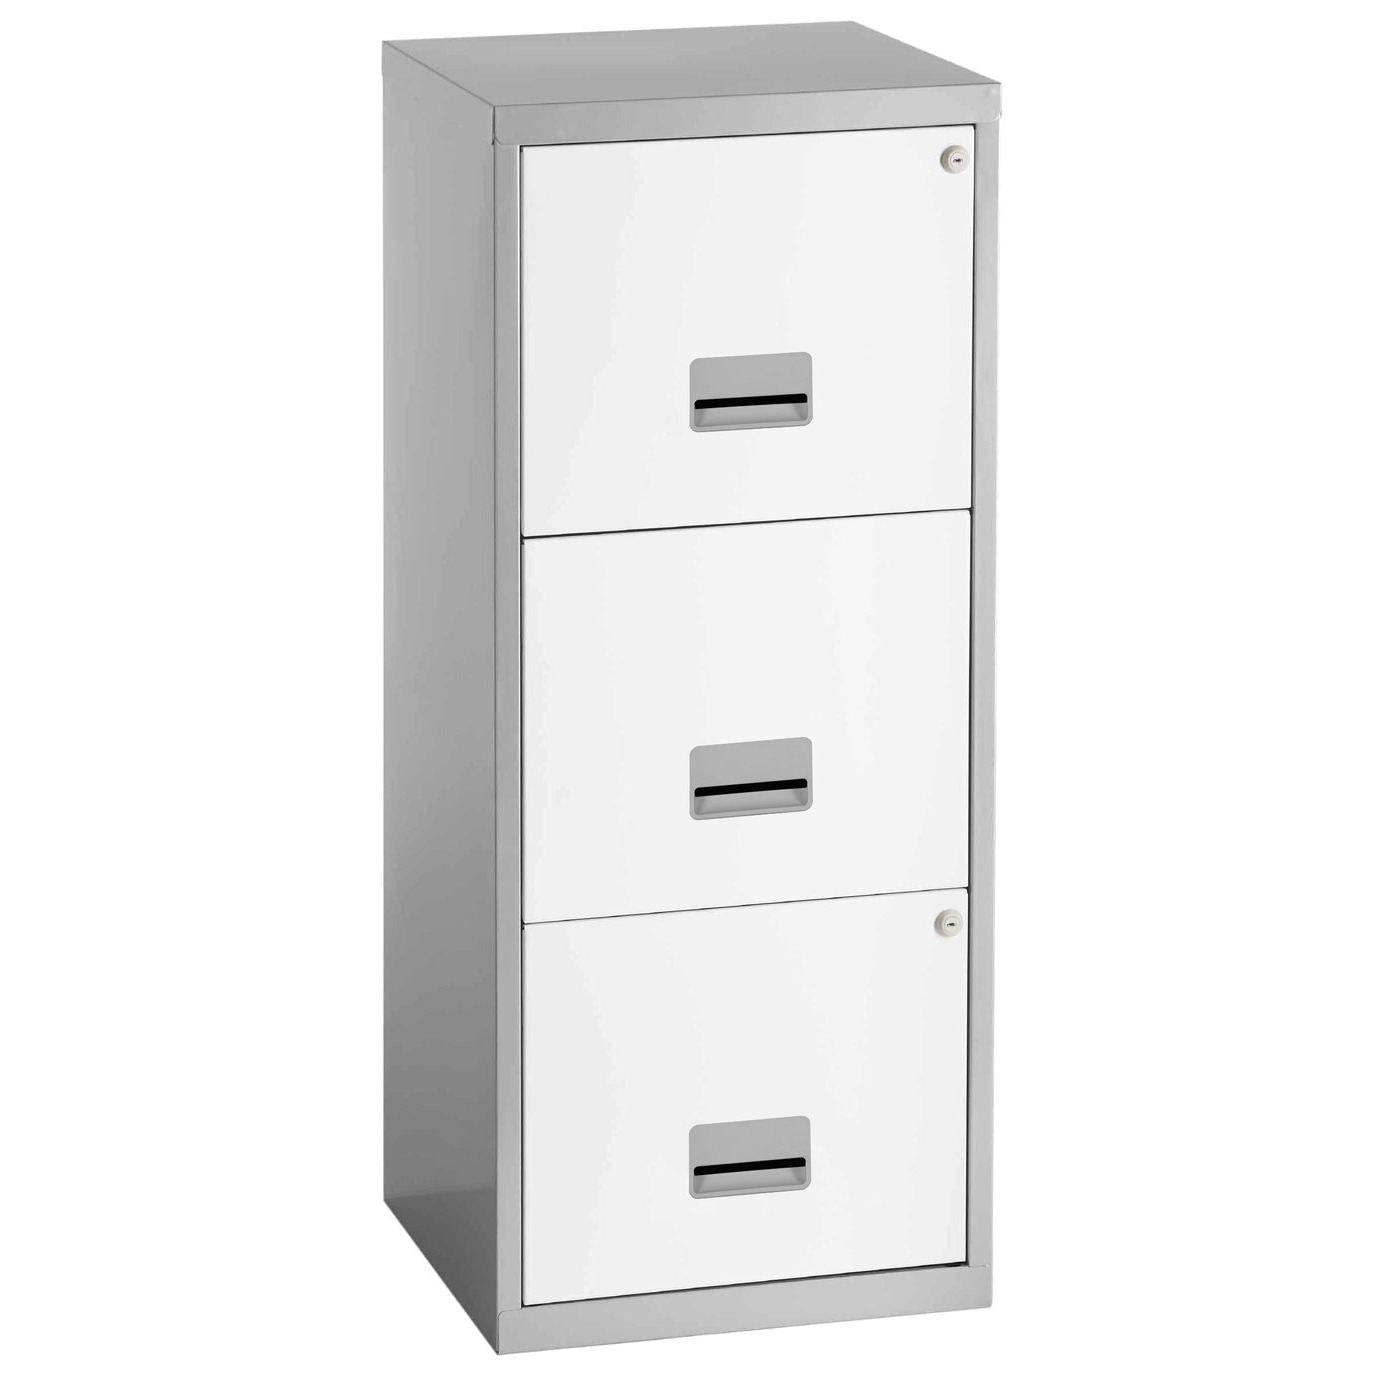 Pierre Henry 3 Drawer A4 Filing Cabinet - Silver & White - image 1